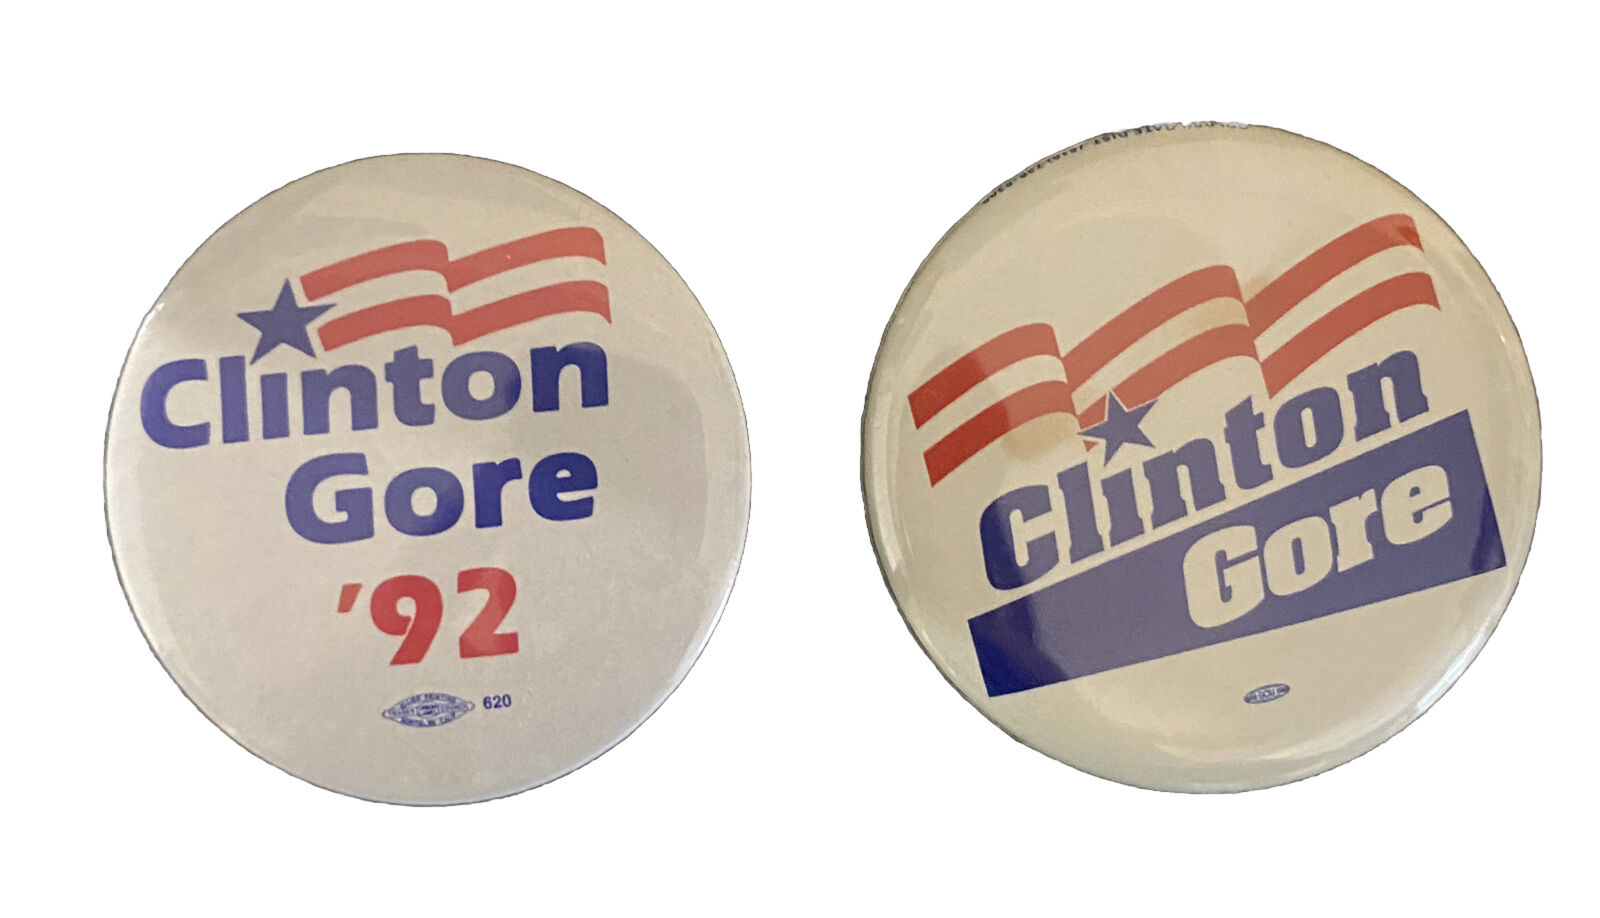 Vintage Clinton Gore \'92 Presidential Campaign Buttons Set of 2 Election